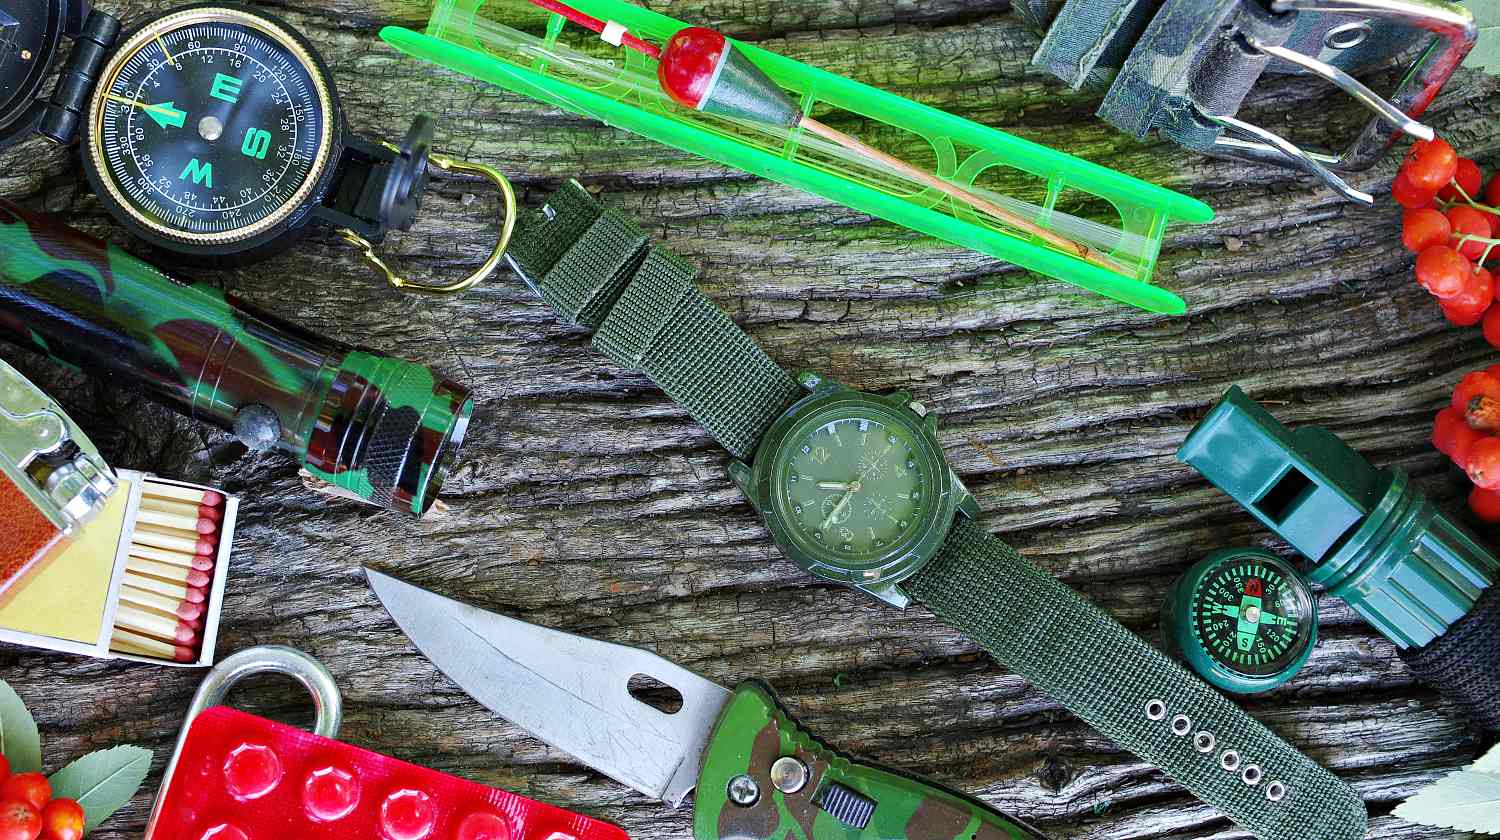 Feature | Survival kit | Essential Items For New Preppers [Video]